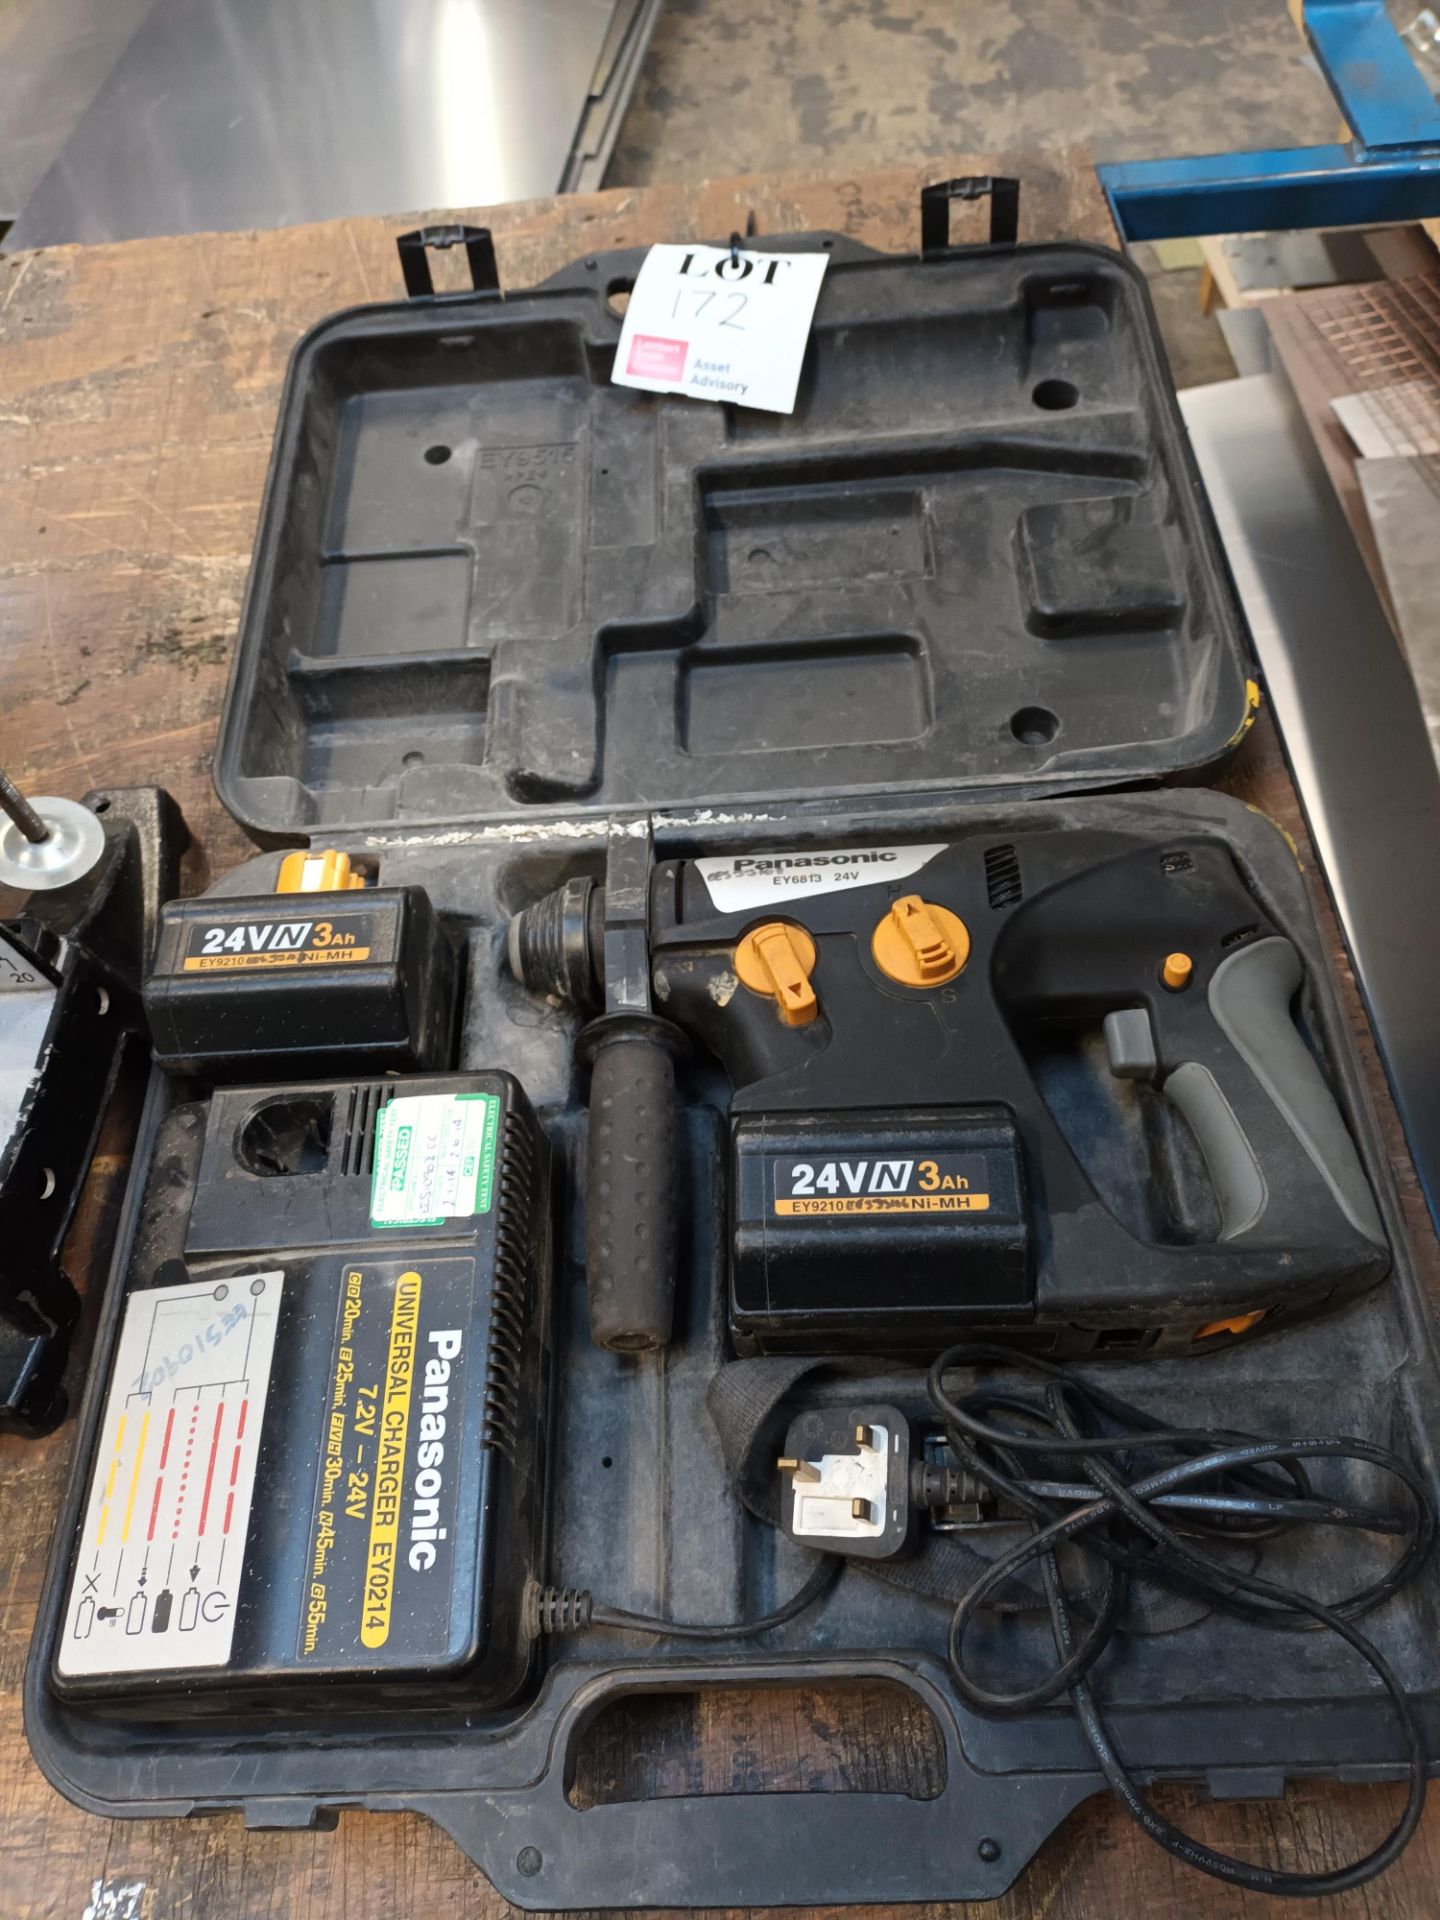 Panasonic EY6813 cordless hammer drill with carry case, two batteries and charger